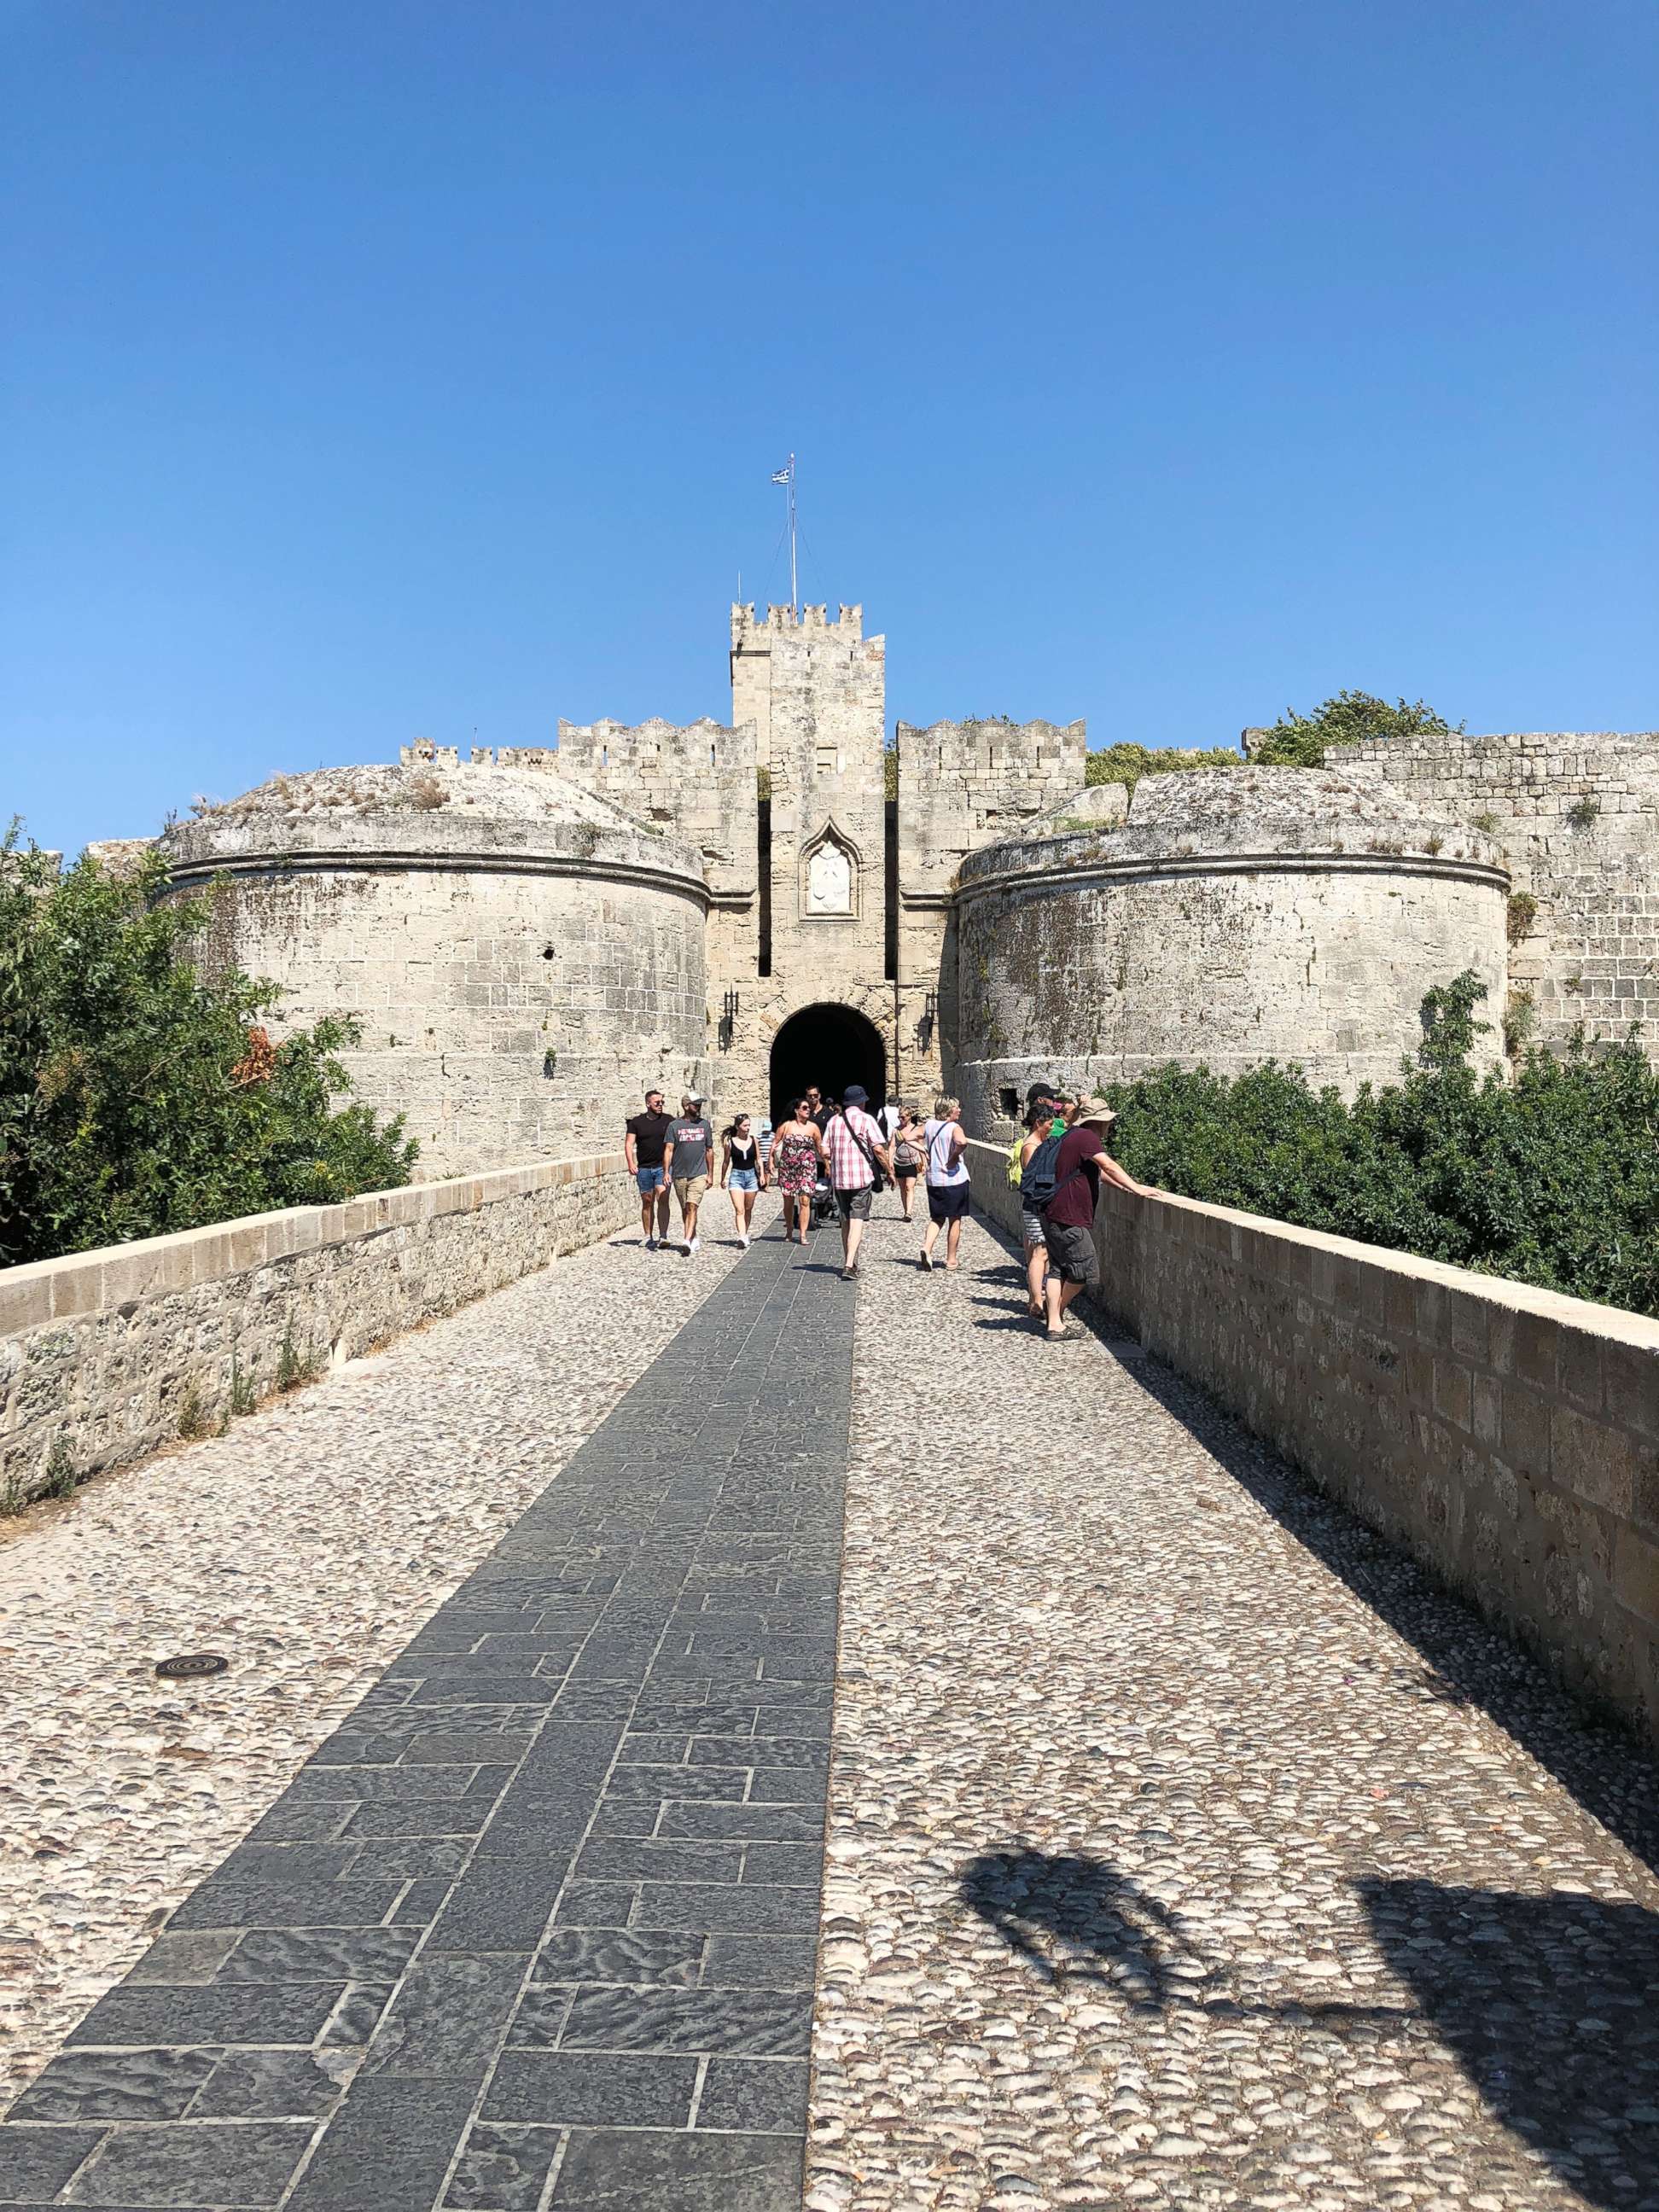 PHOTO: An entrance to the Medieval Old Town on the island of Rhodes, Greece